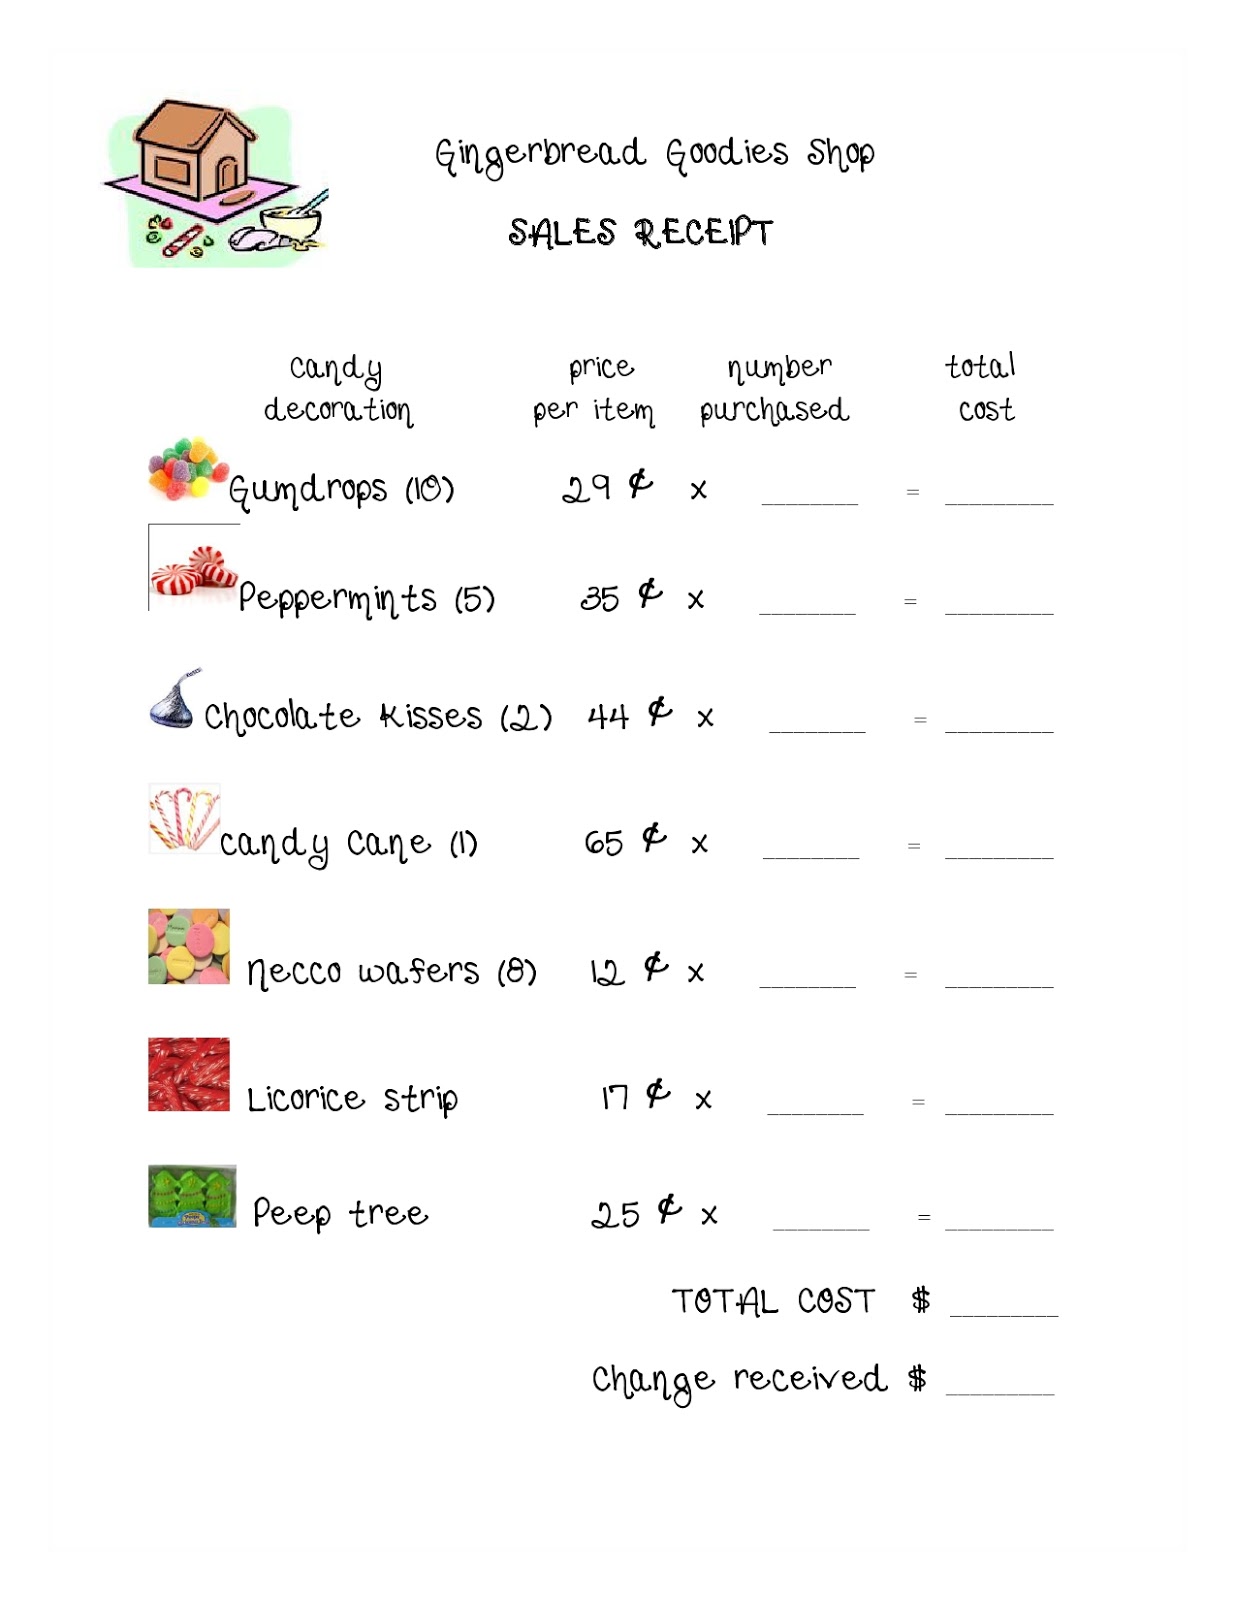 Design Your Own Gingerbread House Worksheet House List Disign